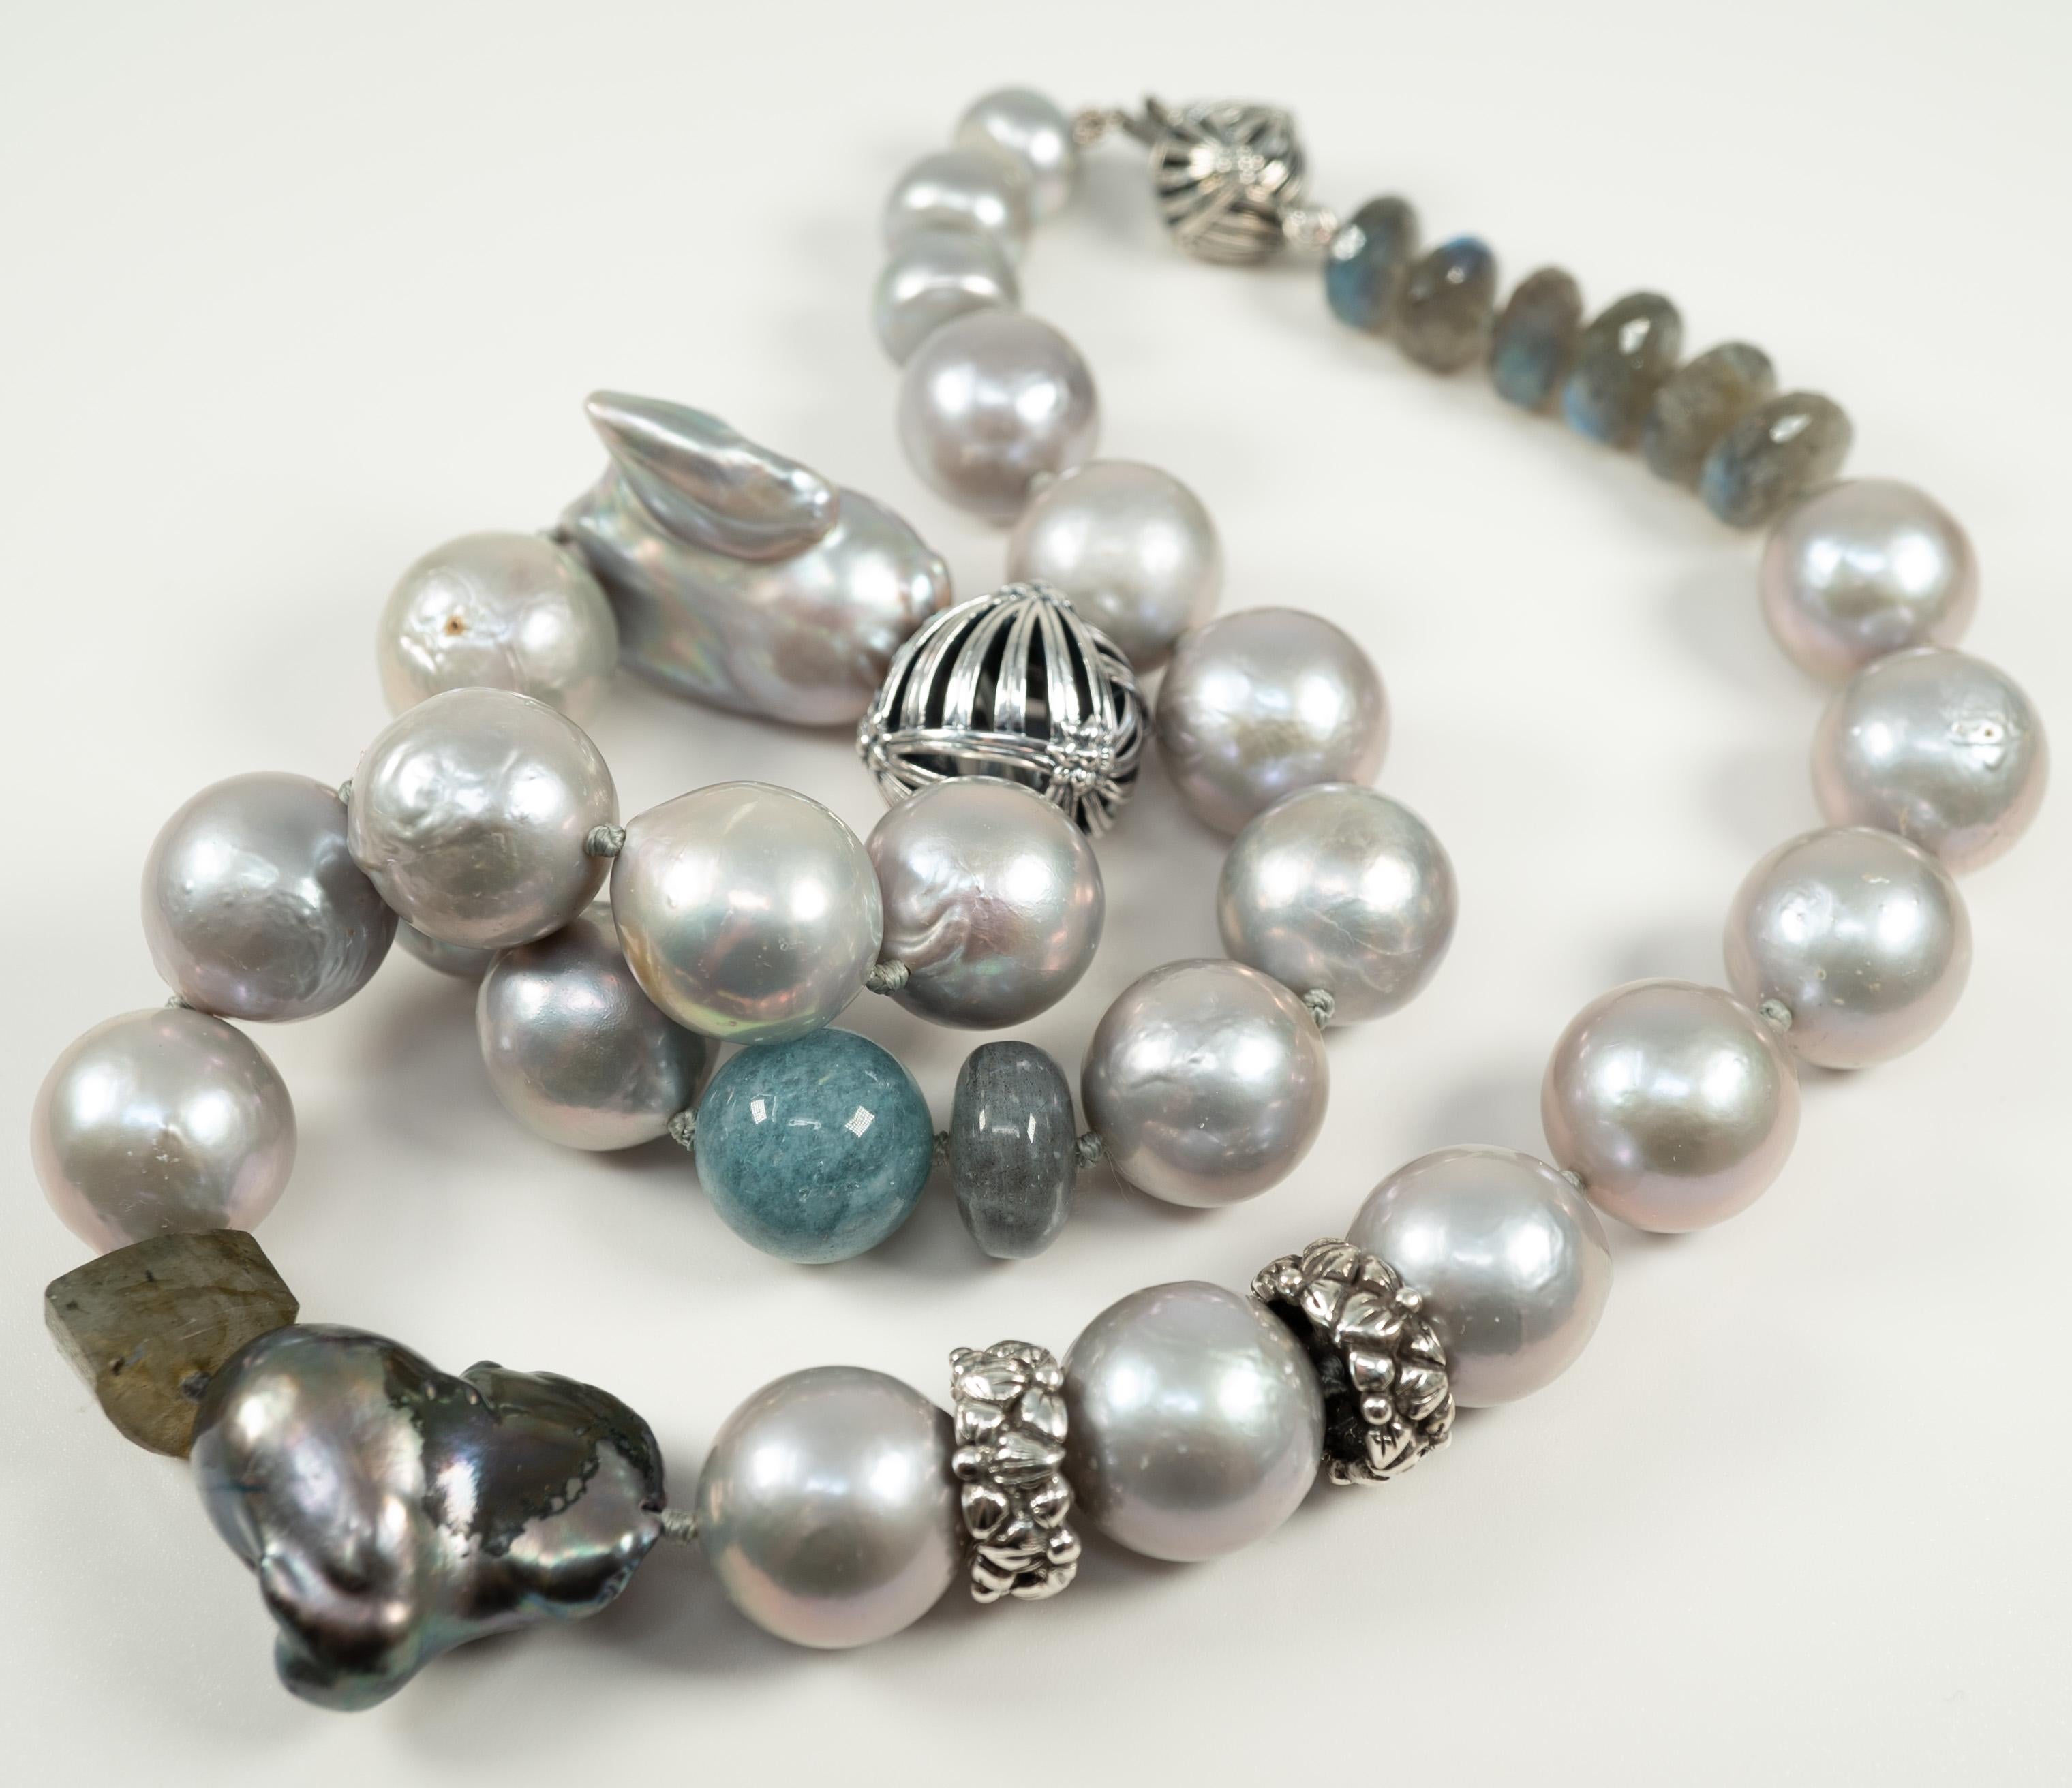 Mother Nature provided some fun shapes of pearls for this necklace by famed designer Stephen Dweck!  With accent sterling silver rondells and beads and carved quartz and labradorite.  